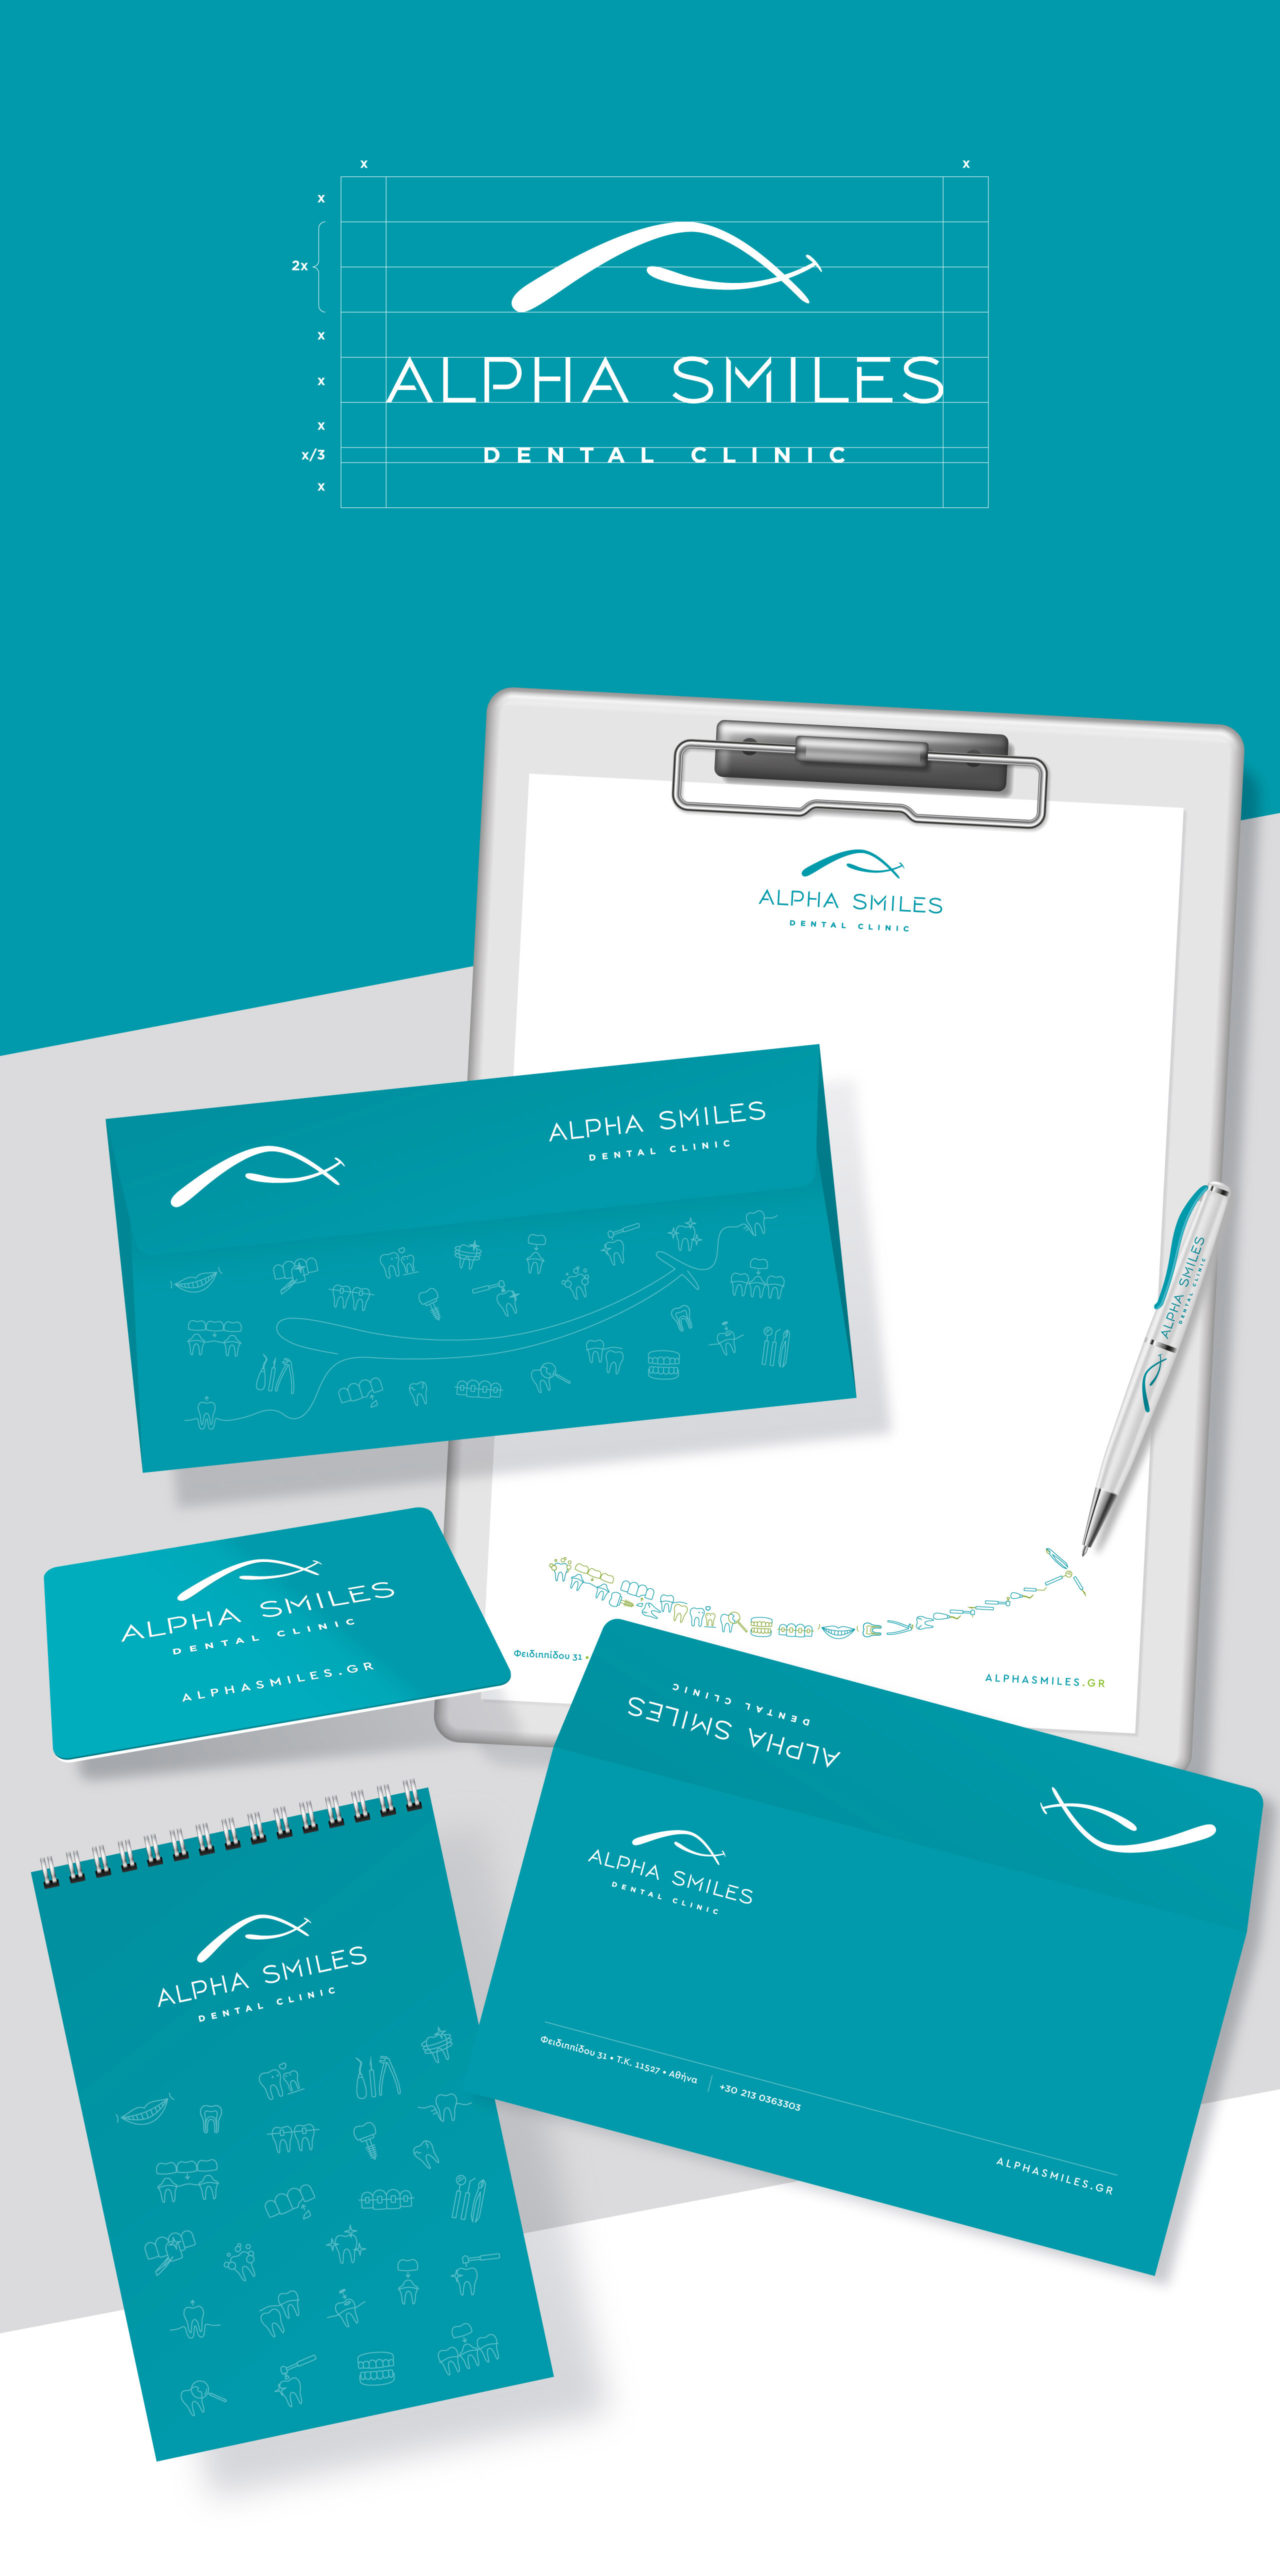 Visual brand identiity and stationery design for Alpha Smiles dental clinic